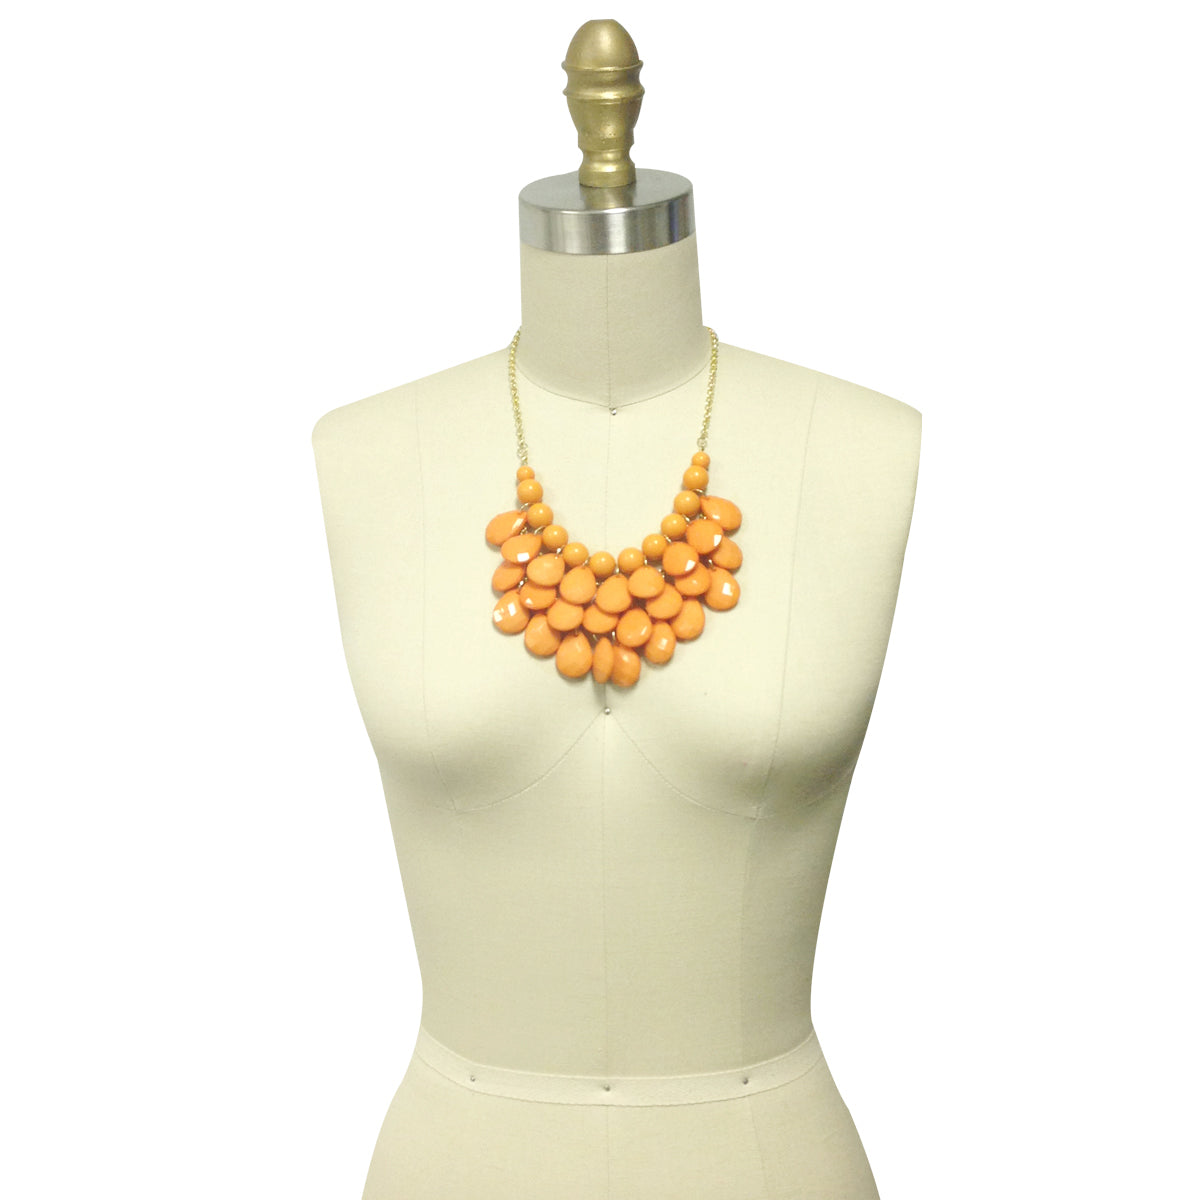 Wrapables Teardrop Bubble Bib Necklace and Earring Set